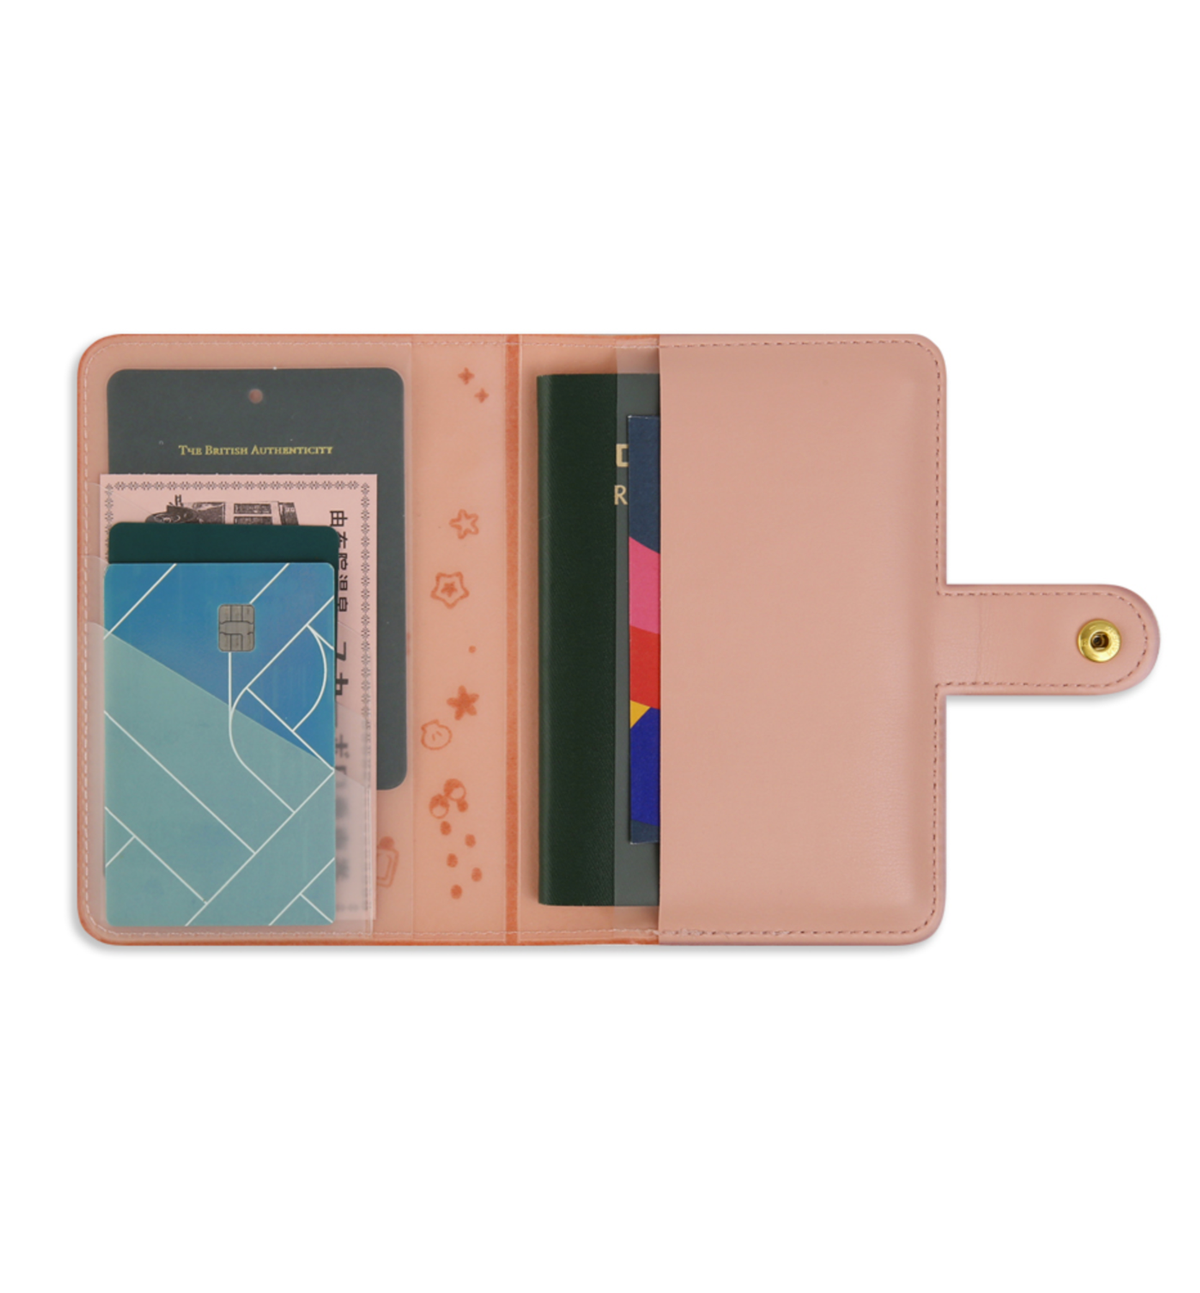 BT21 Minini Leather Patch Passport Cover [Vacance]